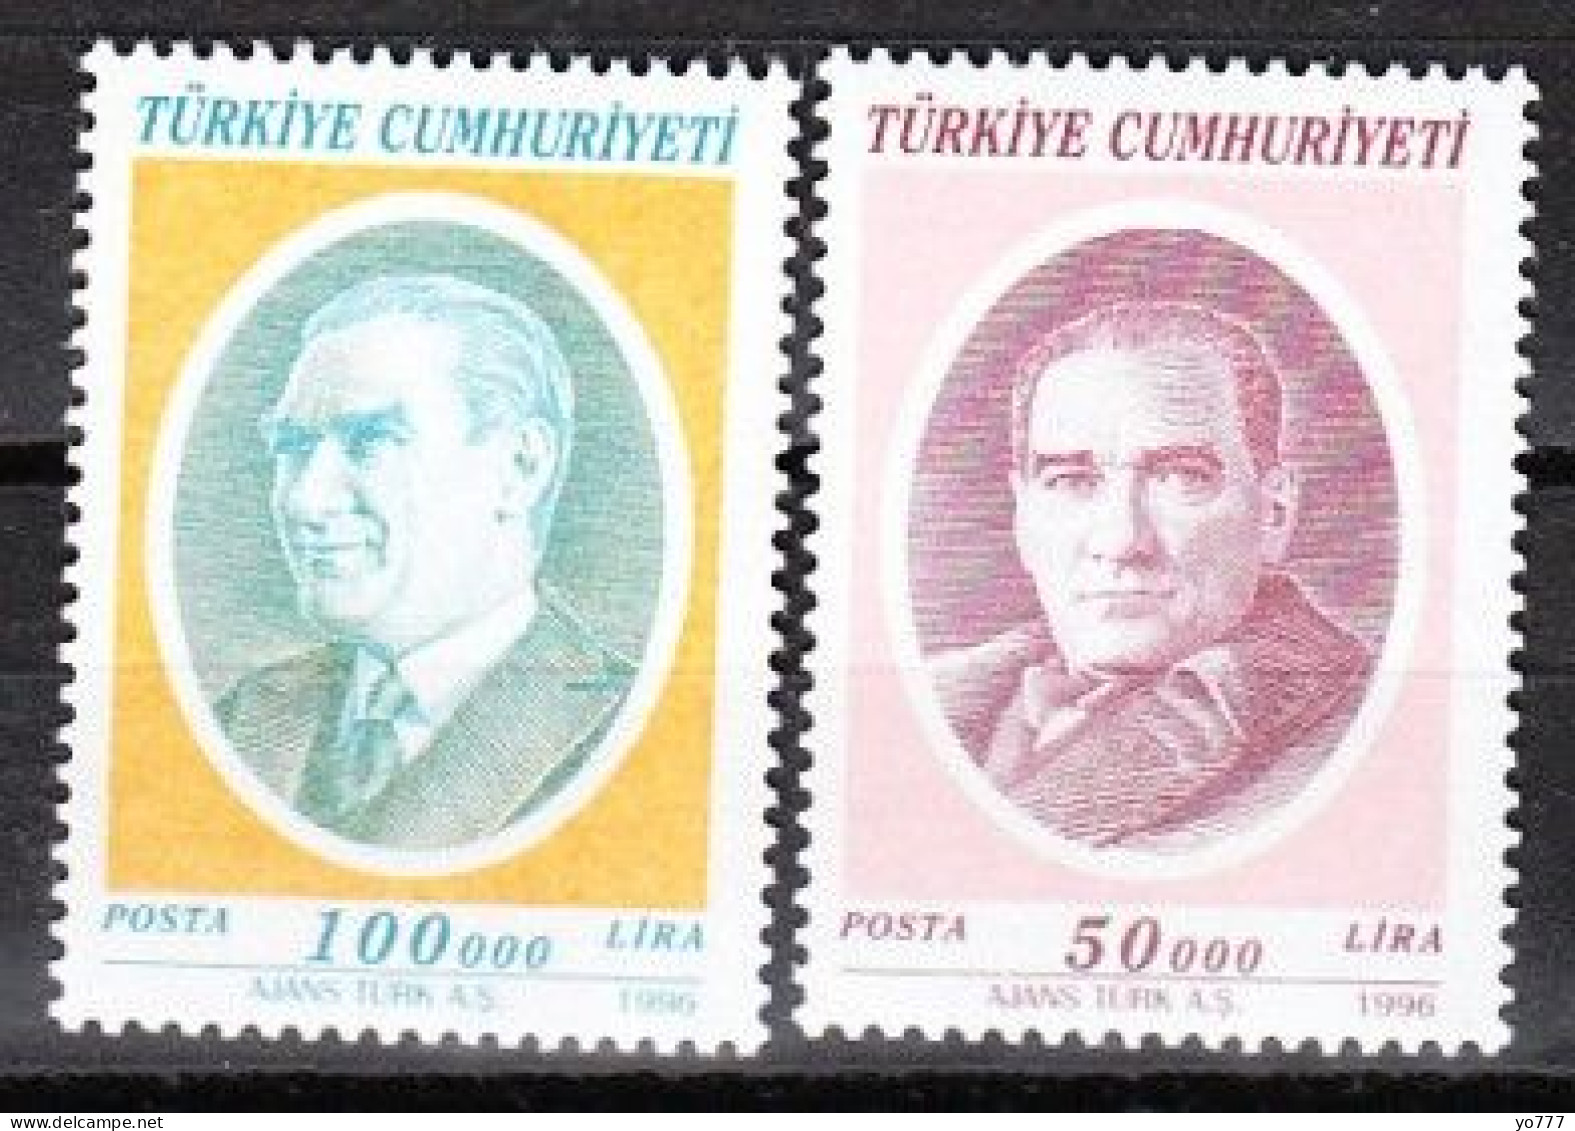 (3076-77) TURKEY REGULAR ISSUE STAMPS MNH** - Unused Stamps